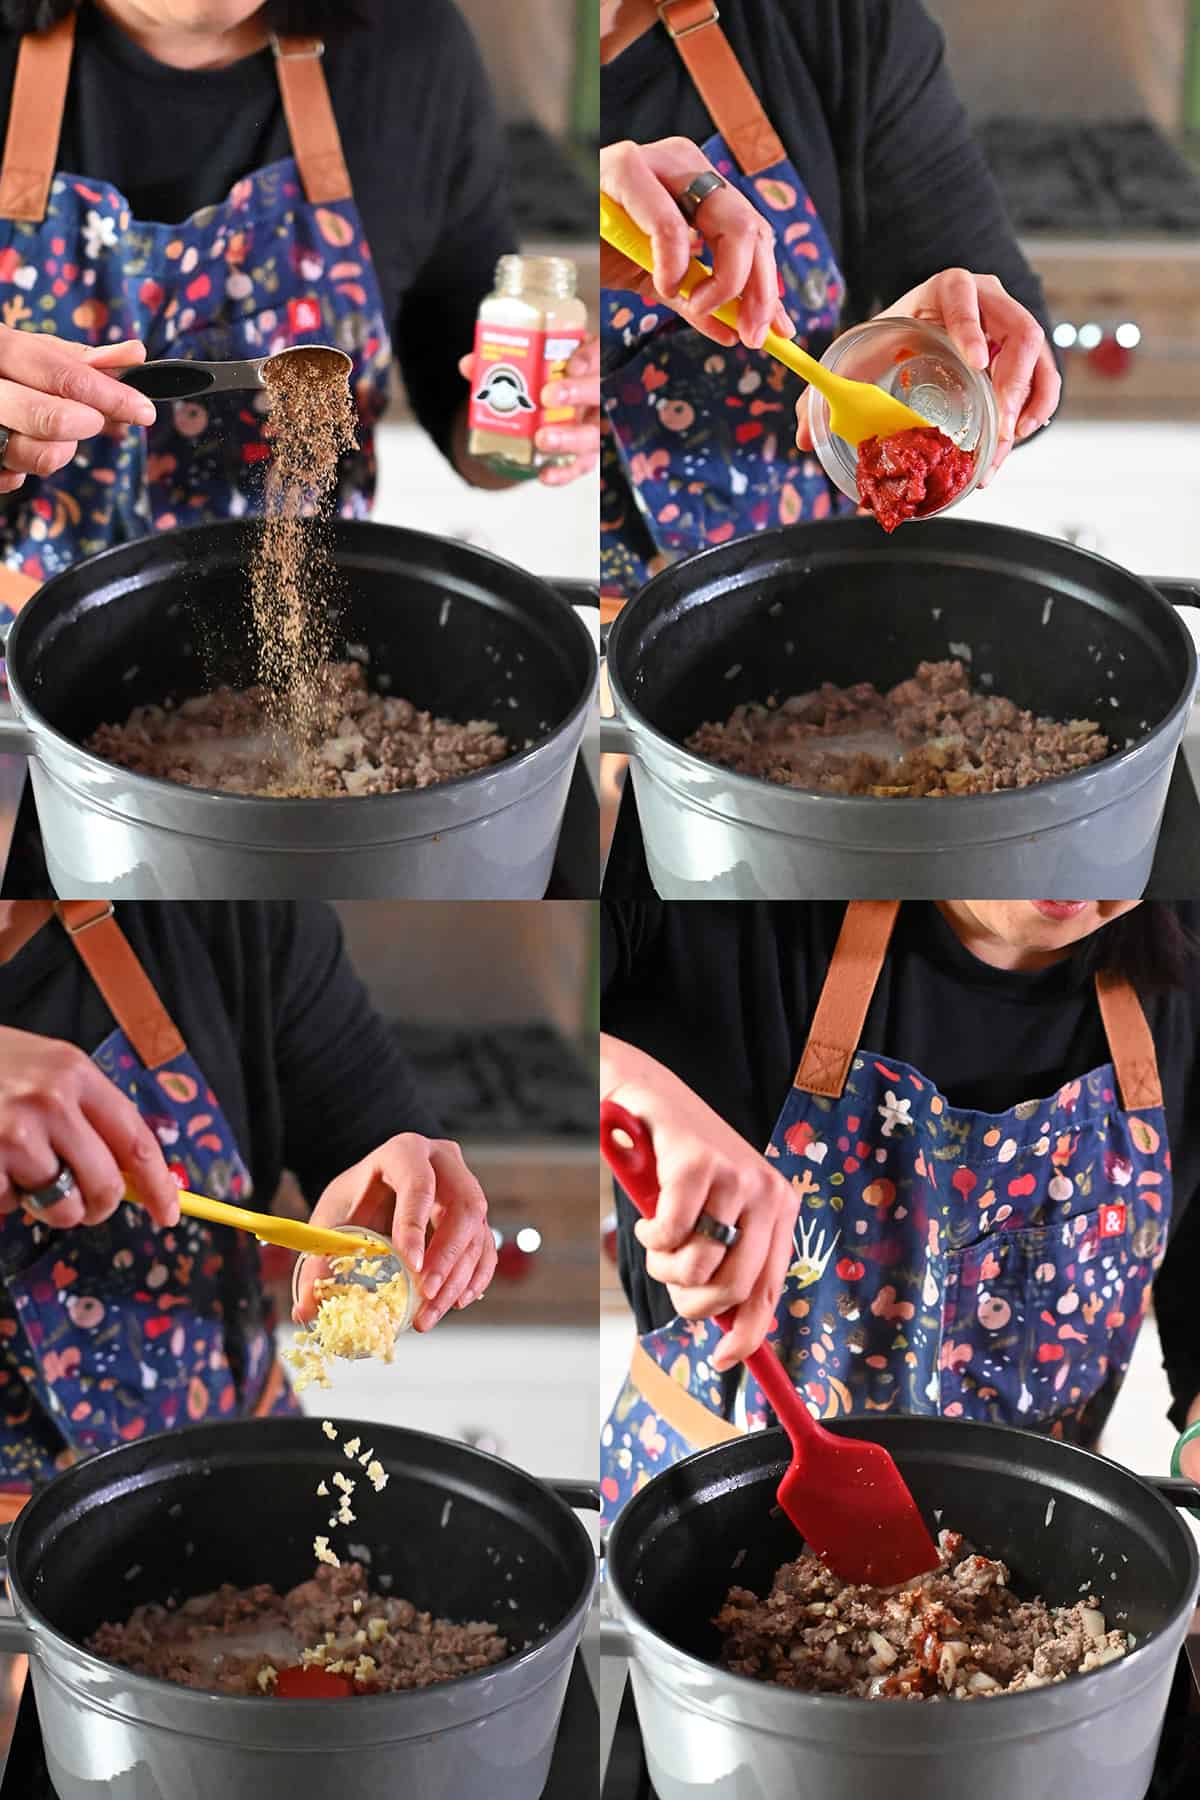 Four sequential photos that show someone adding Nom Nom Paleo Magic Mushroom Powder, tomato paste, and minced garlic to a gray stockpot filled with cooked ground meat and onions.